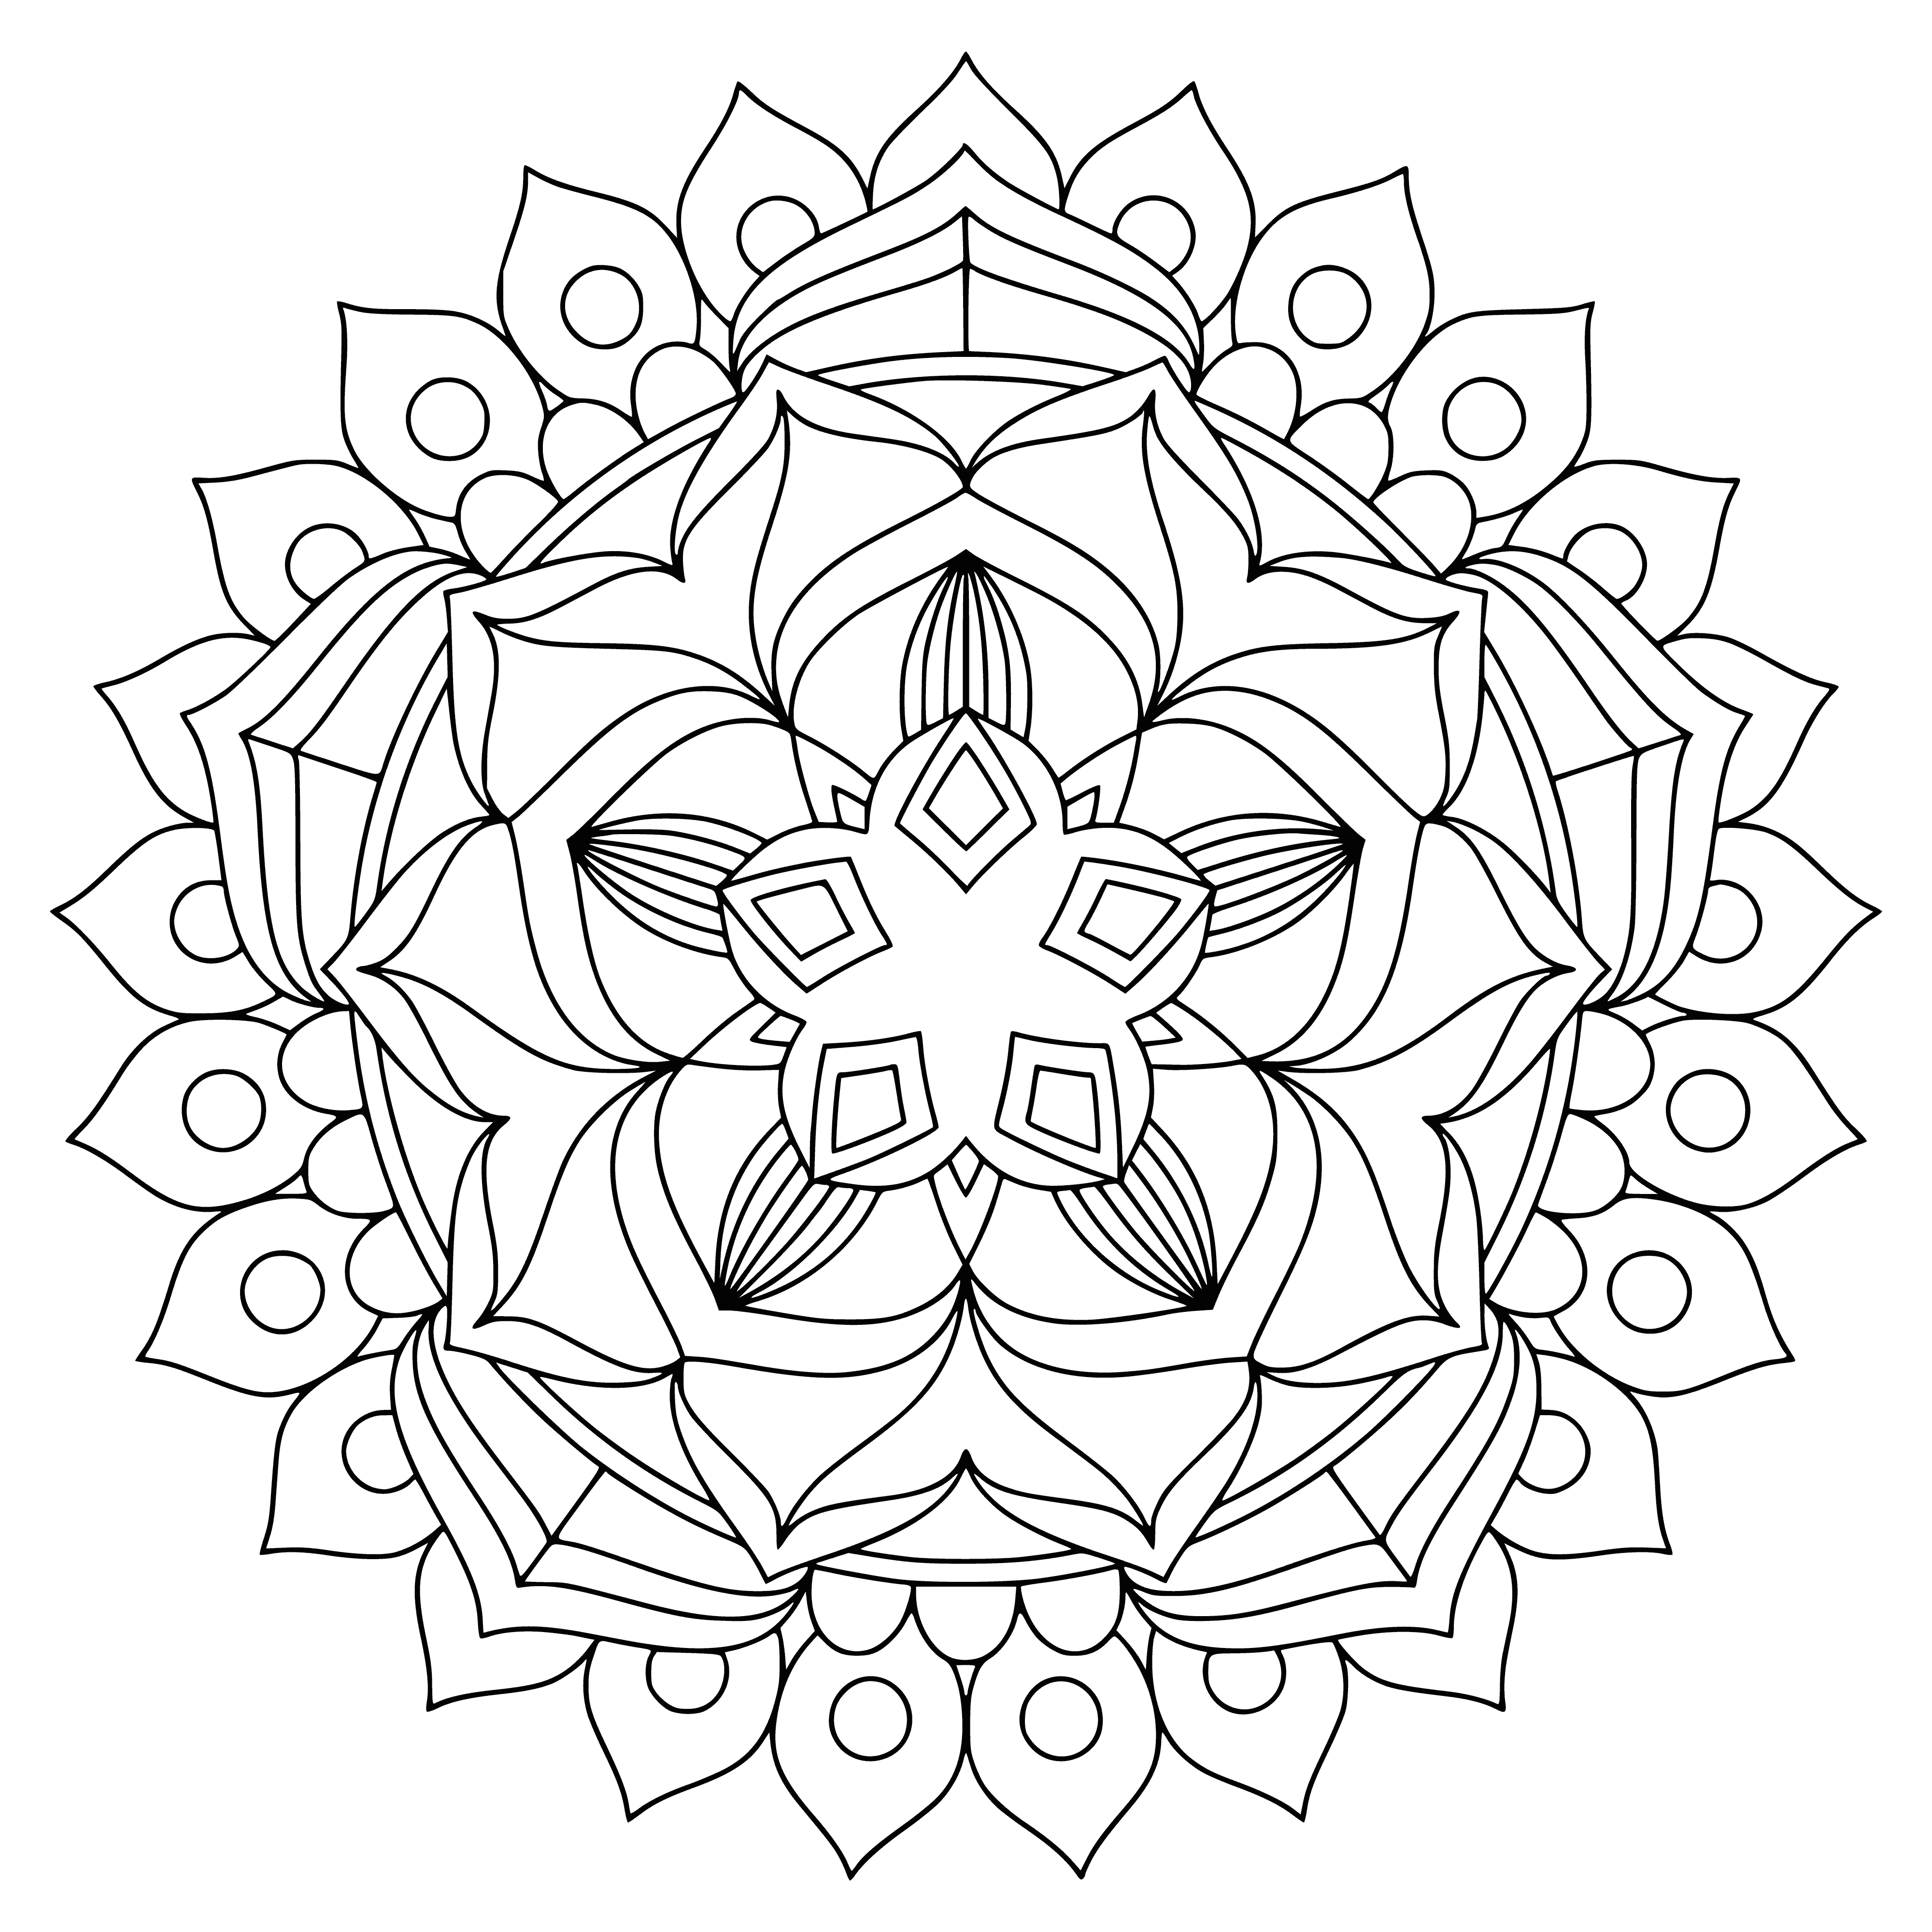 coloring page: 140 Characters: Coloring page featuring a symmetrical flower mandala with a lotus in the center and intricate patterns in each section.